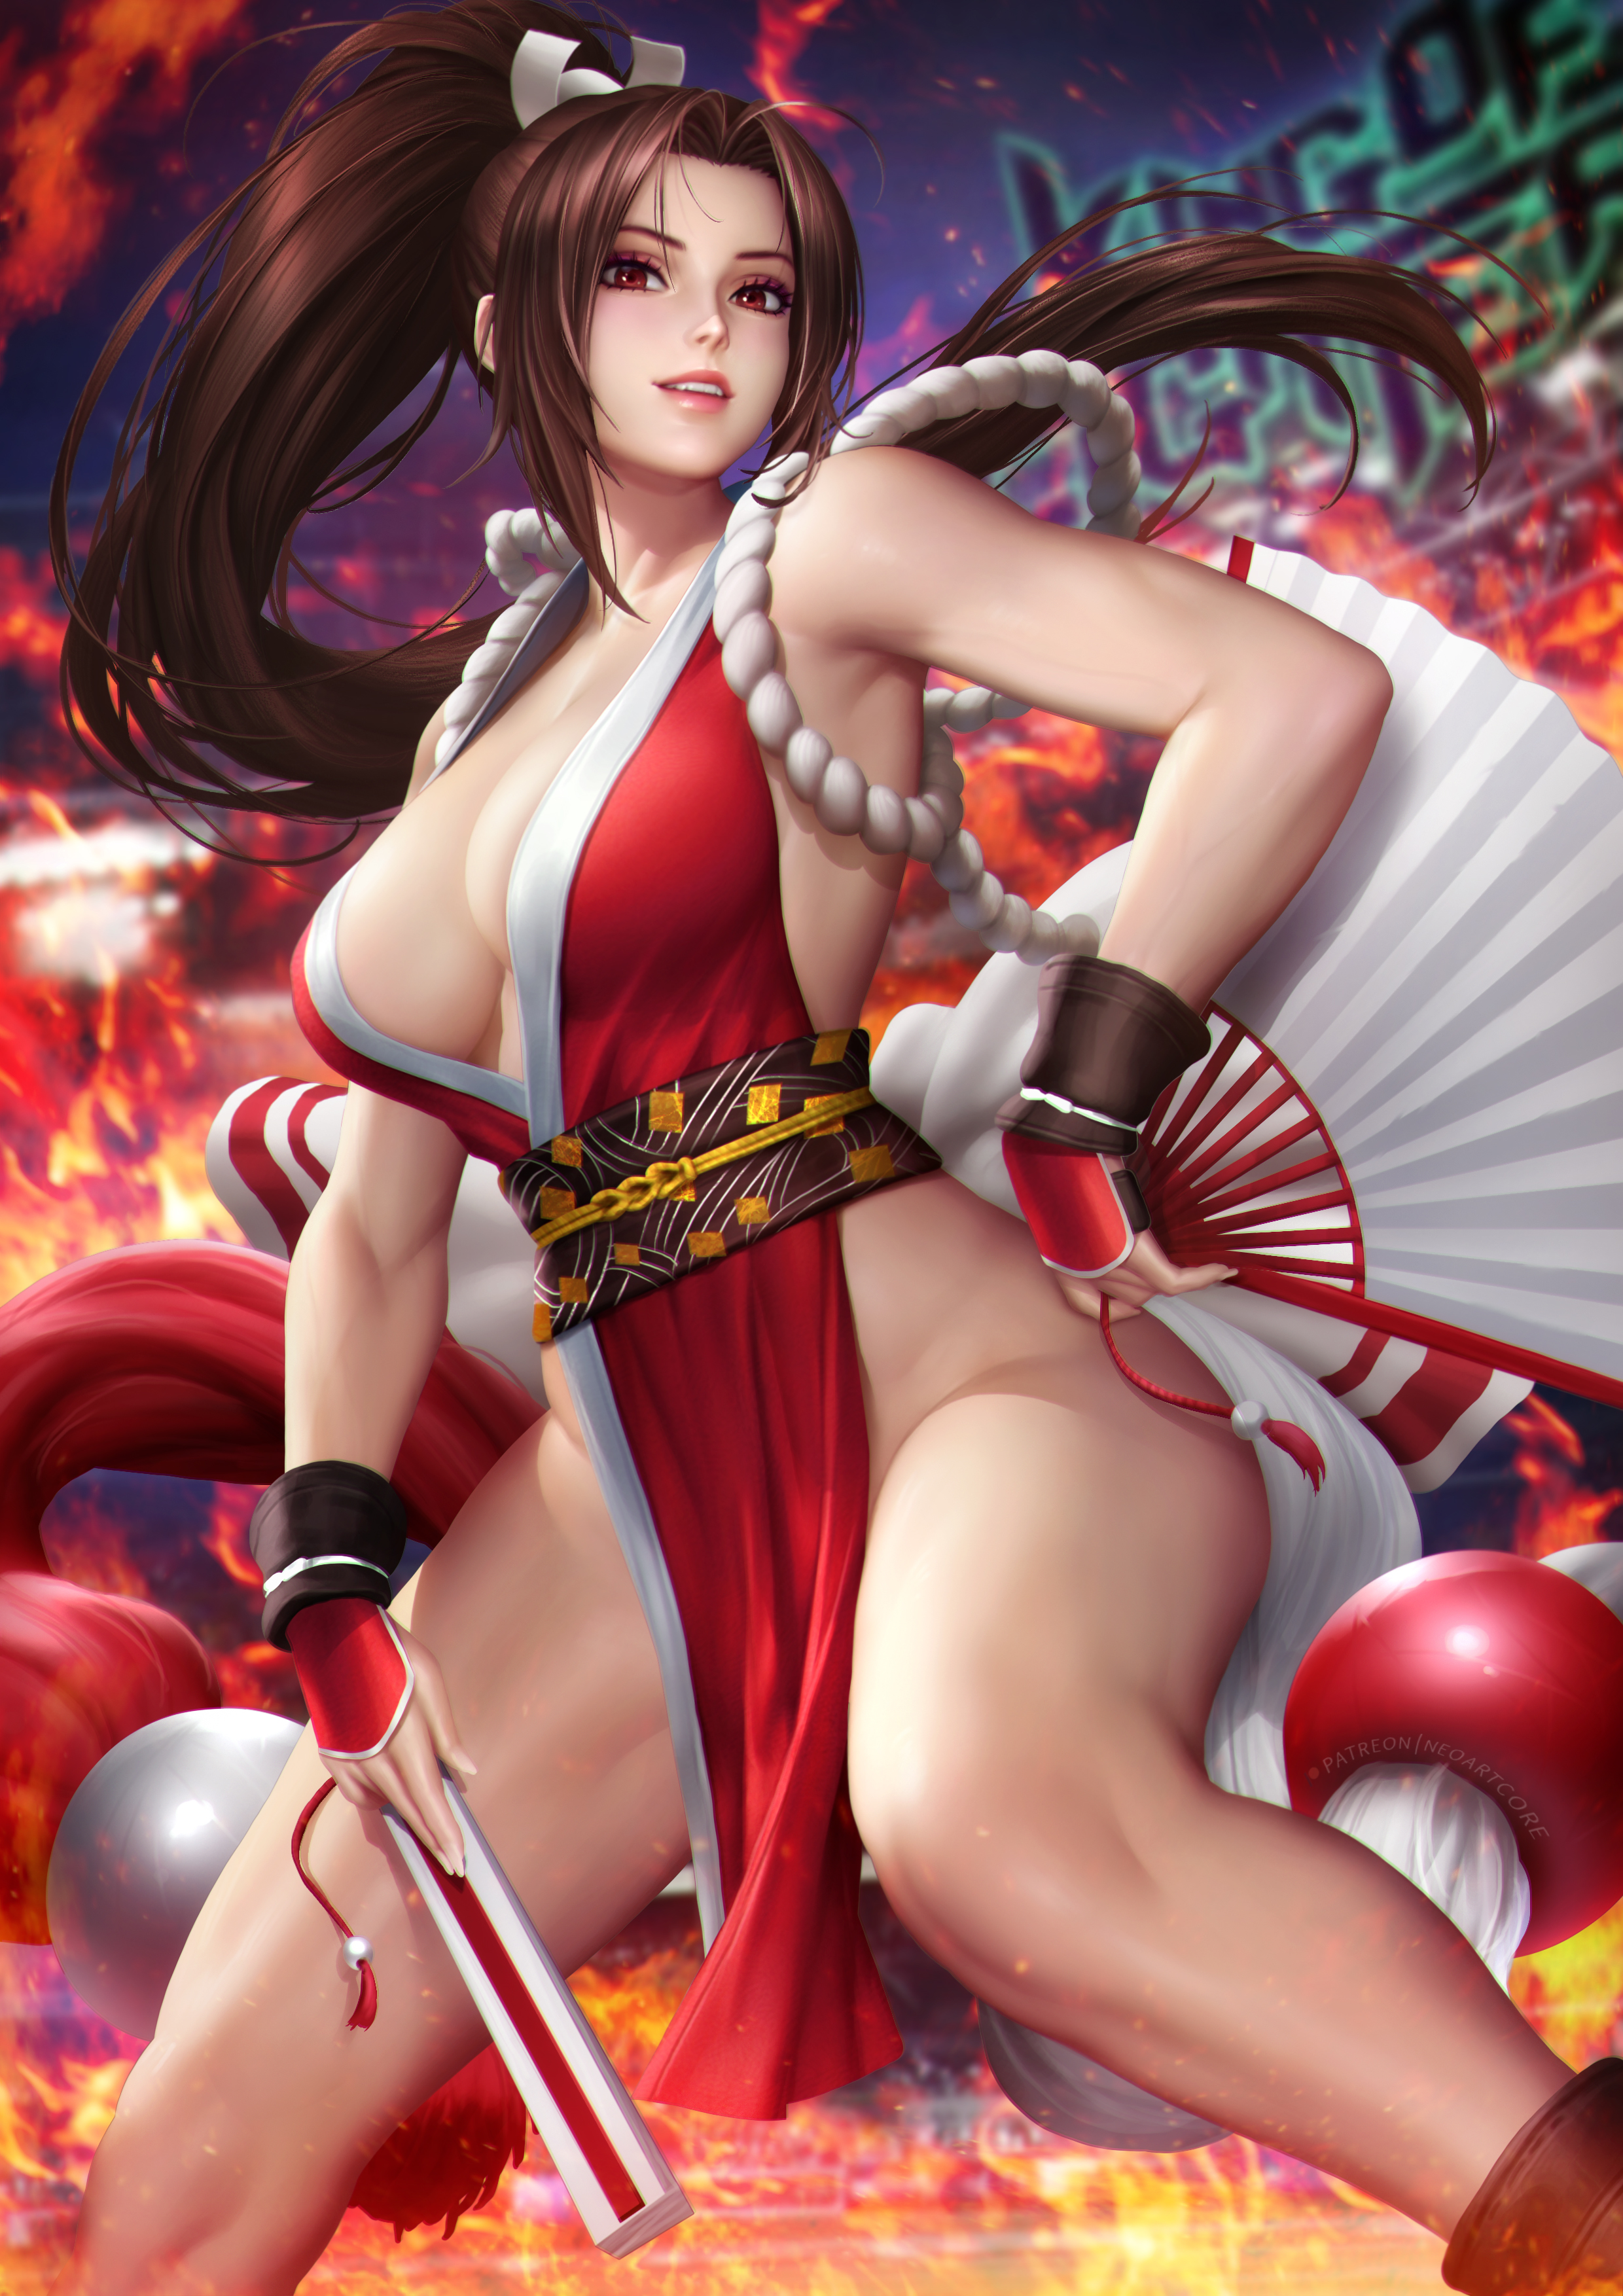 General 2480x3508 Mai Shiranui King of Fighters SNK video games video game characters brunette long hair red eyes low-angle Kunoichi fans thighs curvy portrait display artwork drawing digital art illustration fan art NeoArtCorE (artist)